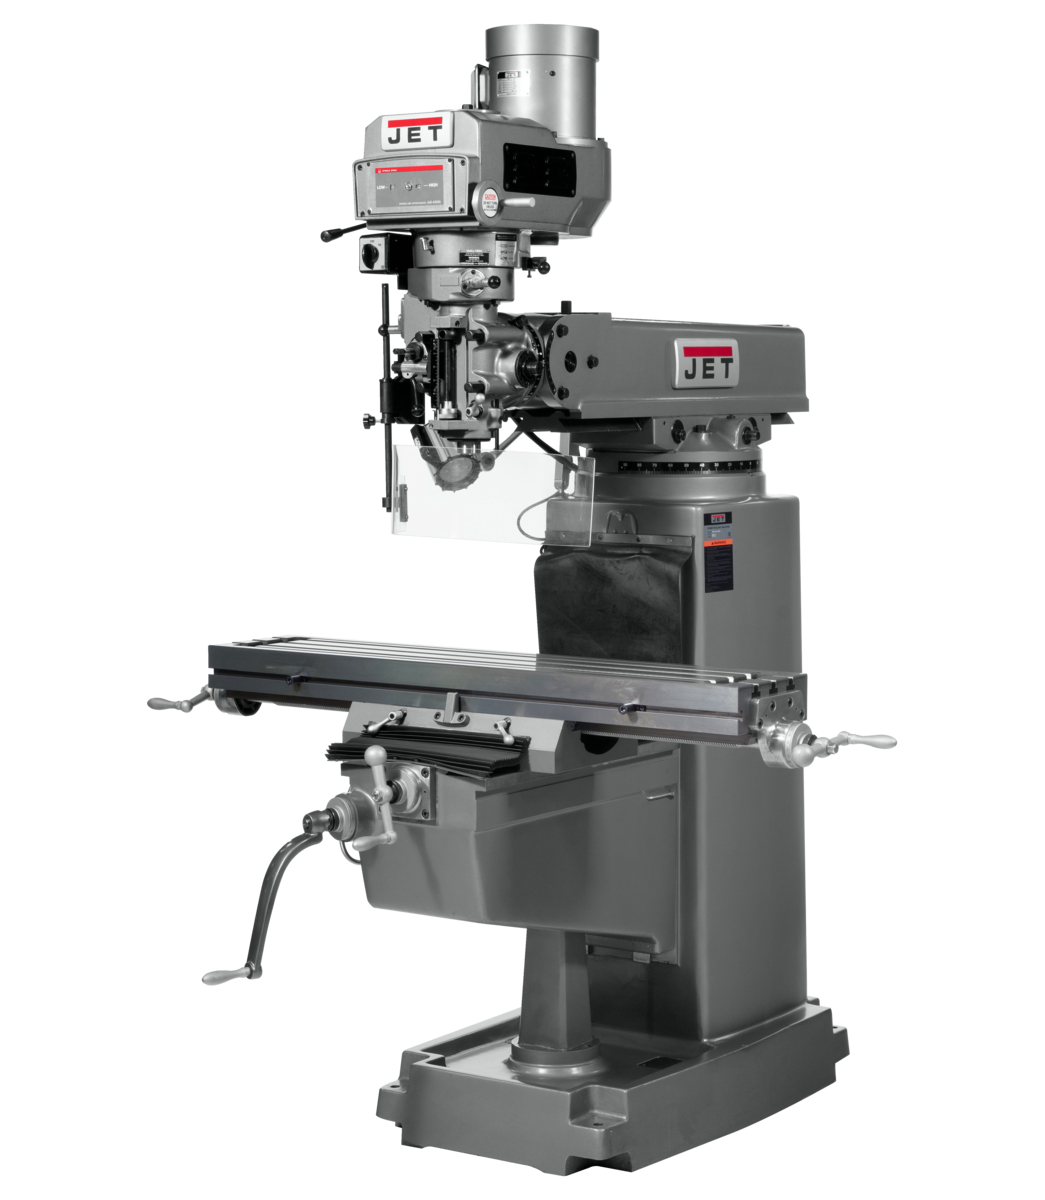 690216, The Jet JTM-1050 Mill With ACU-RITE 203 DRO With X-Axis Powerfeed and 8" Riser Block in Metalworking, Milling, Vertical Mills